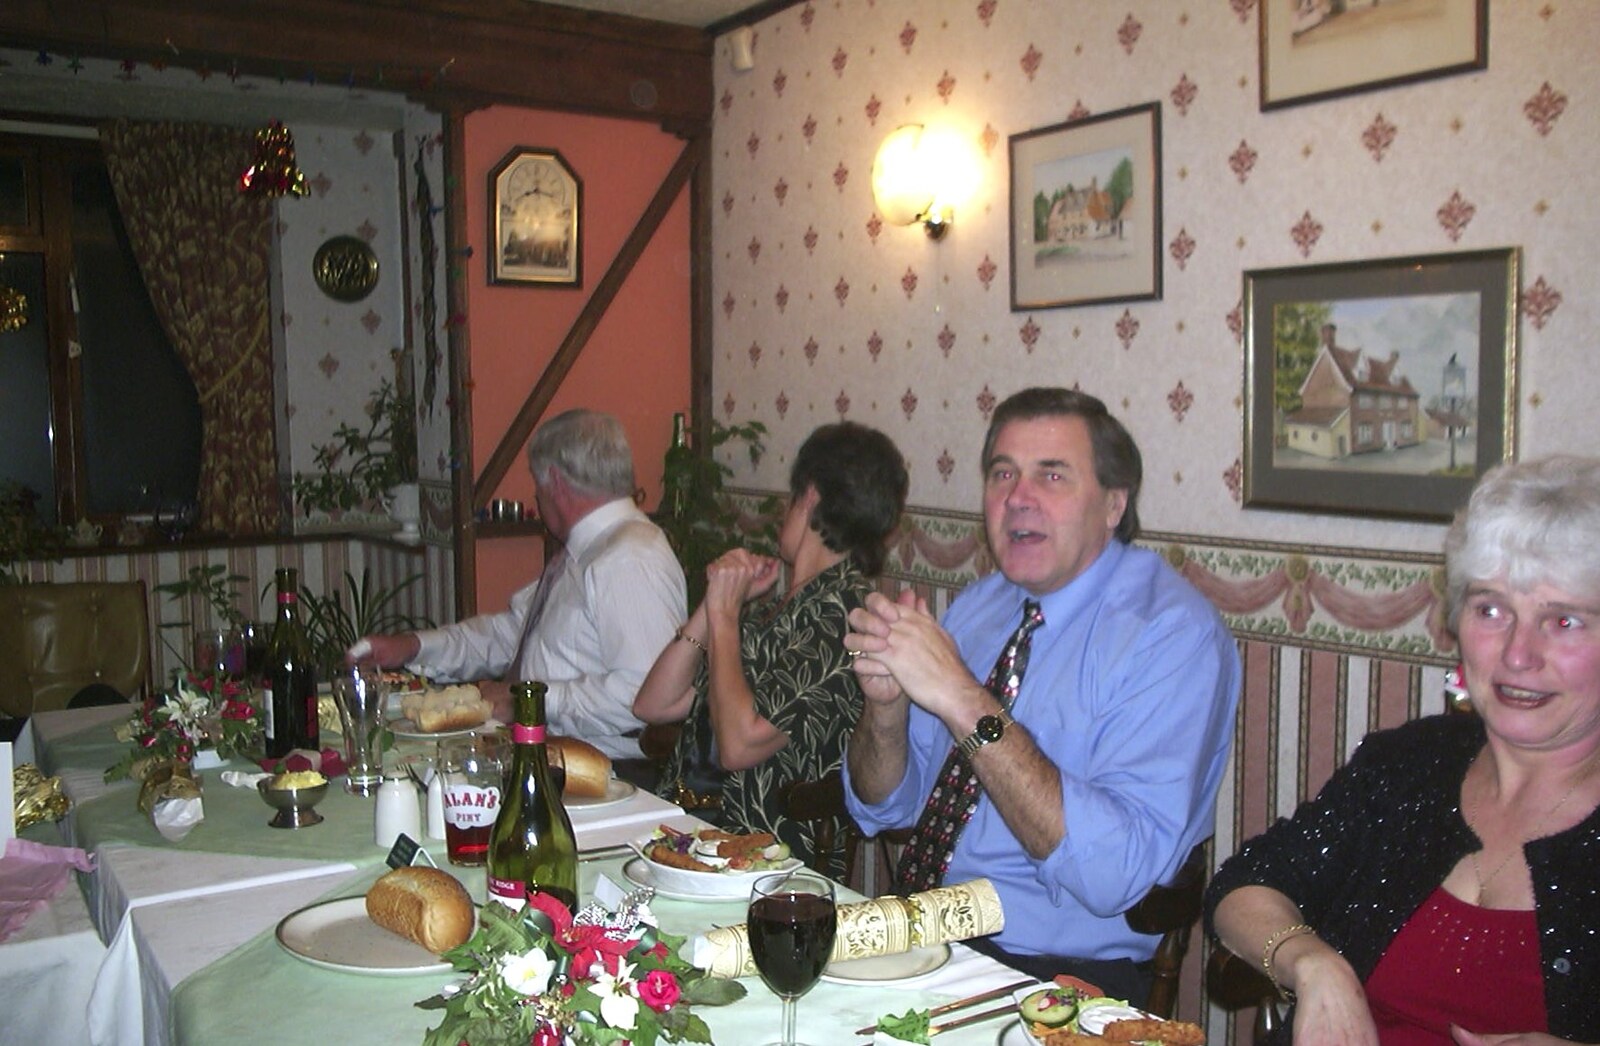 Alan and the top table from The BSCC Christmas Dinner, Brome Swan, Suffolk - 10th December 2002